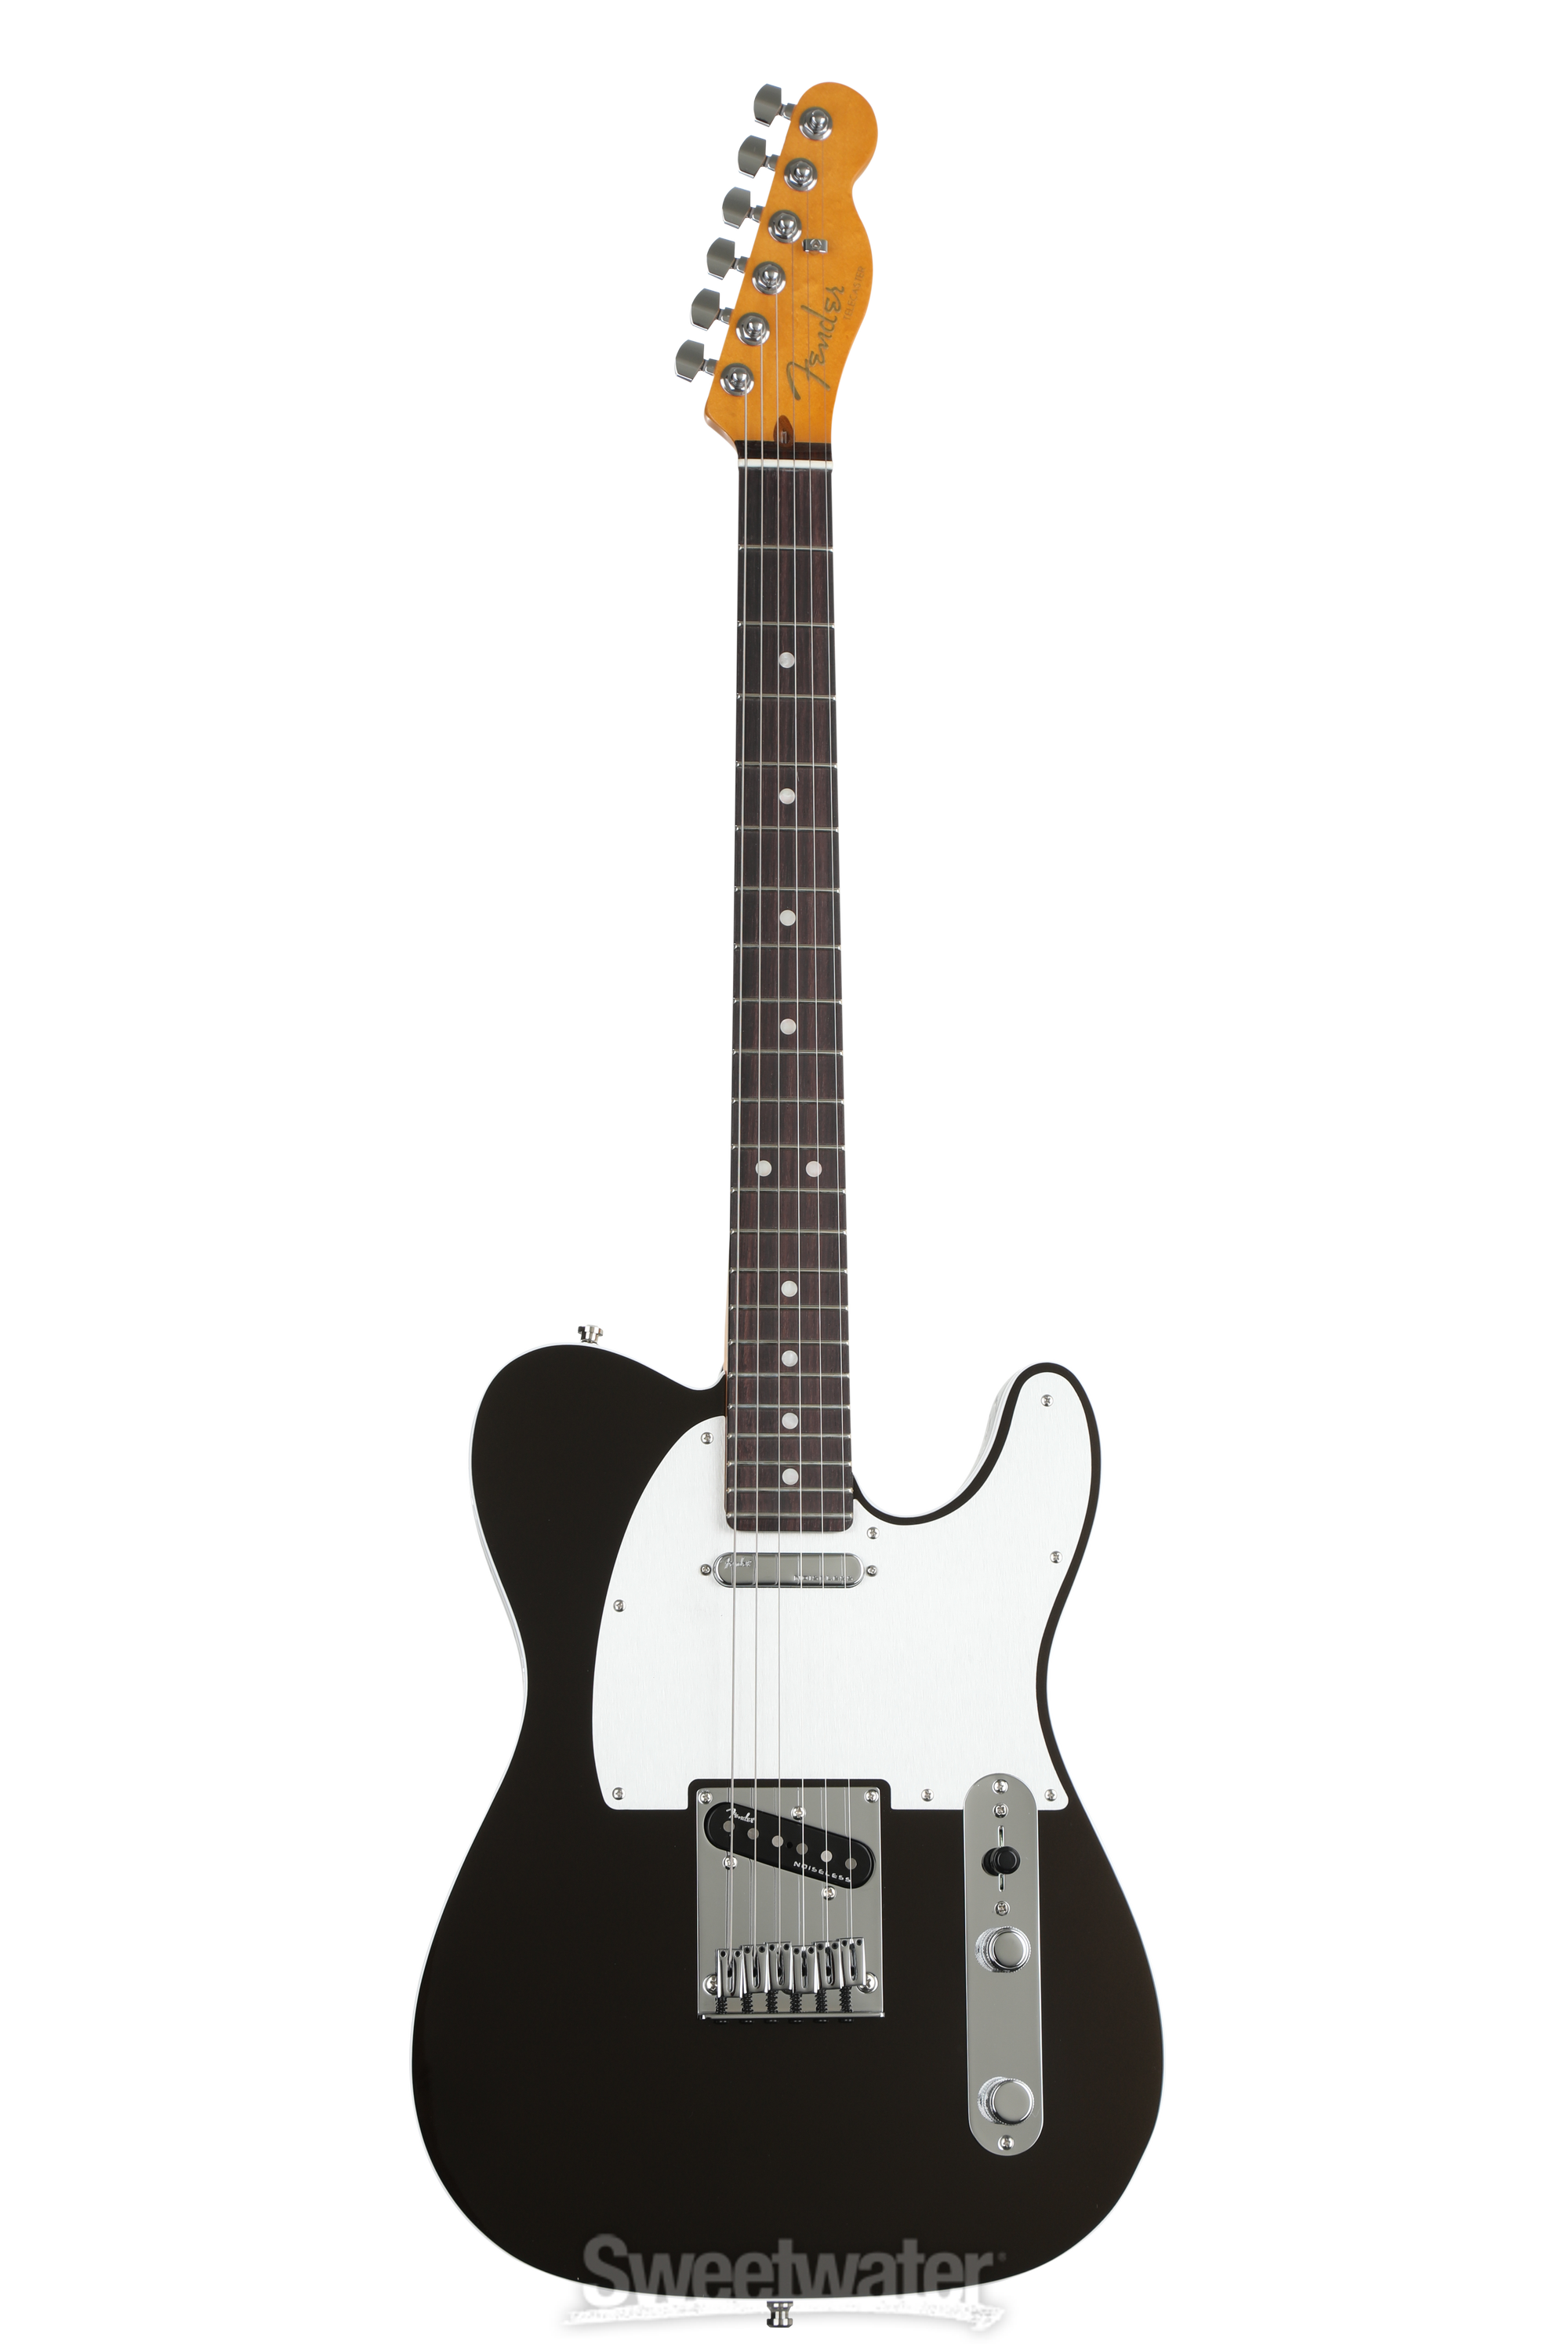 Fender American Ultra Telecaster - Texas Tea with Rosewood Fingerboard |  Sweetwater